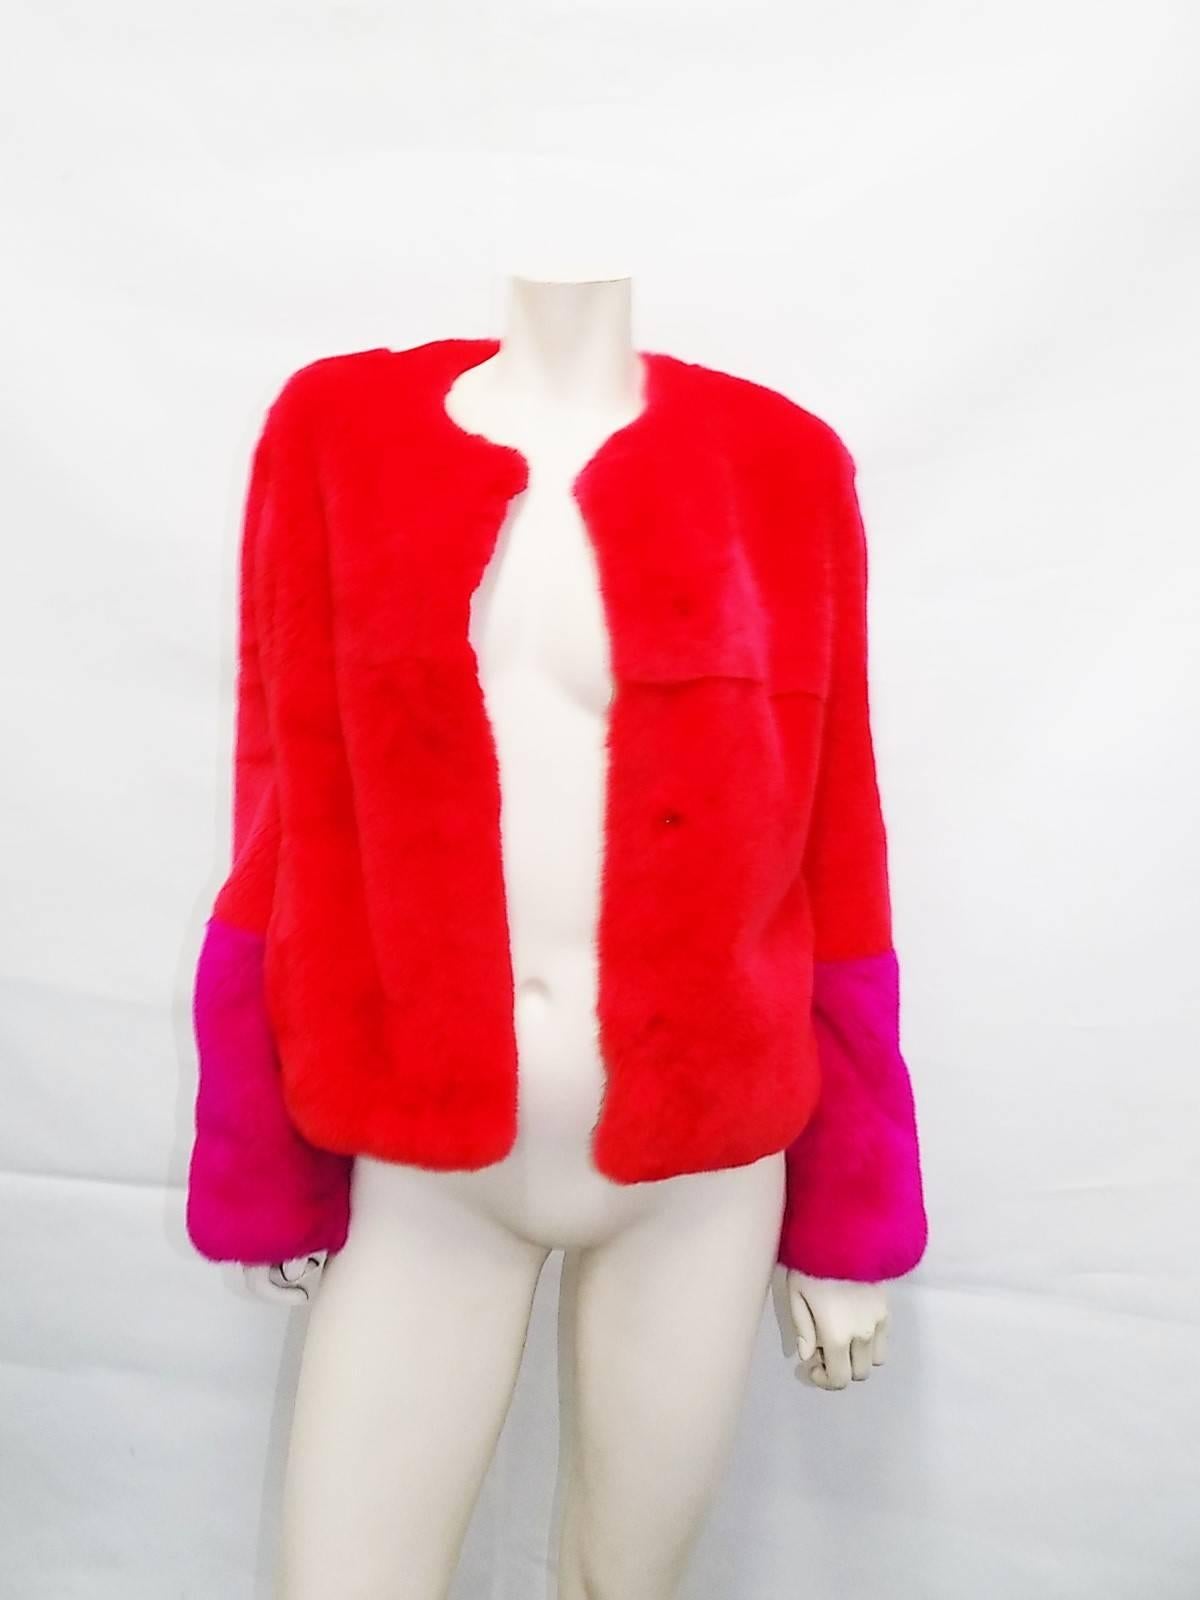 Red Rex Rabbit short fur jacket with  Fushia  Cuffs . MUst Have!! NEW! 3